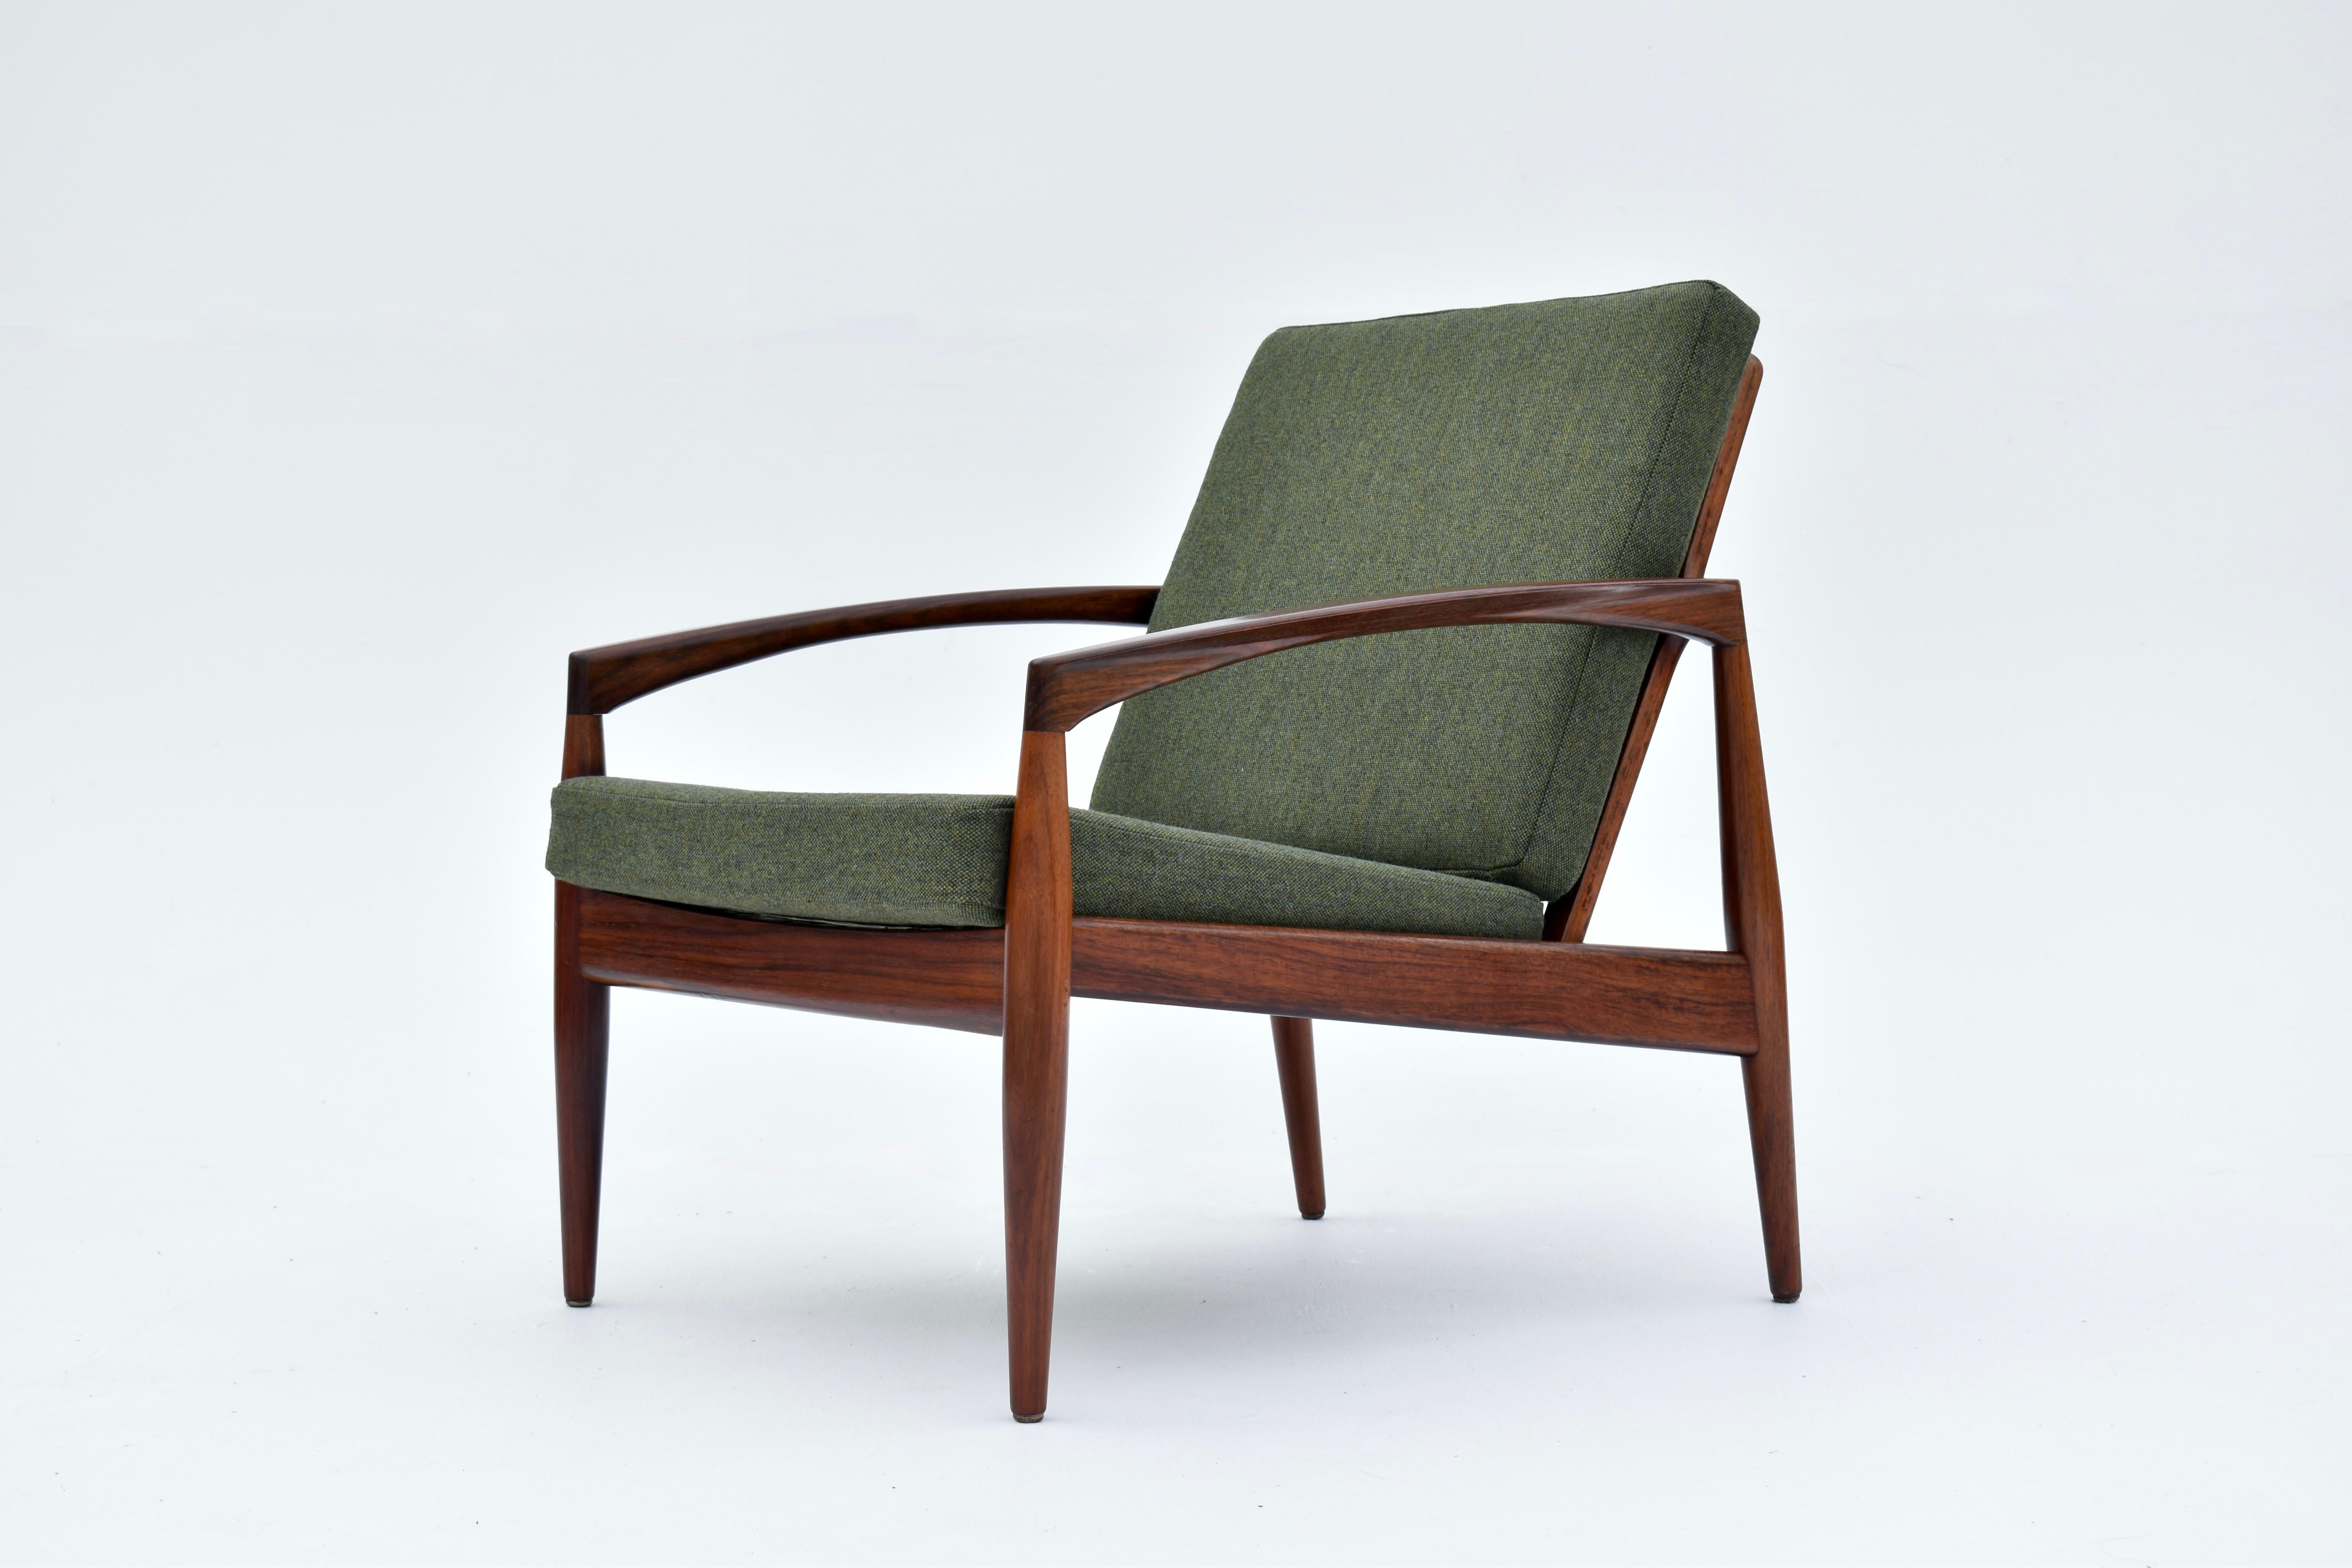 Perhaps Kai Kristiansen’s most celebrated design and a bona fide Danish design classic.

A hard to find original ‘Paperknife’ chair crafted from solid rosewood. One of the most graceful and beautiful chairs of the Danish Modern period.

This chair